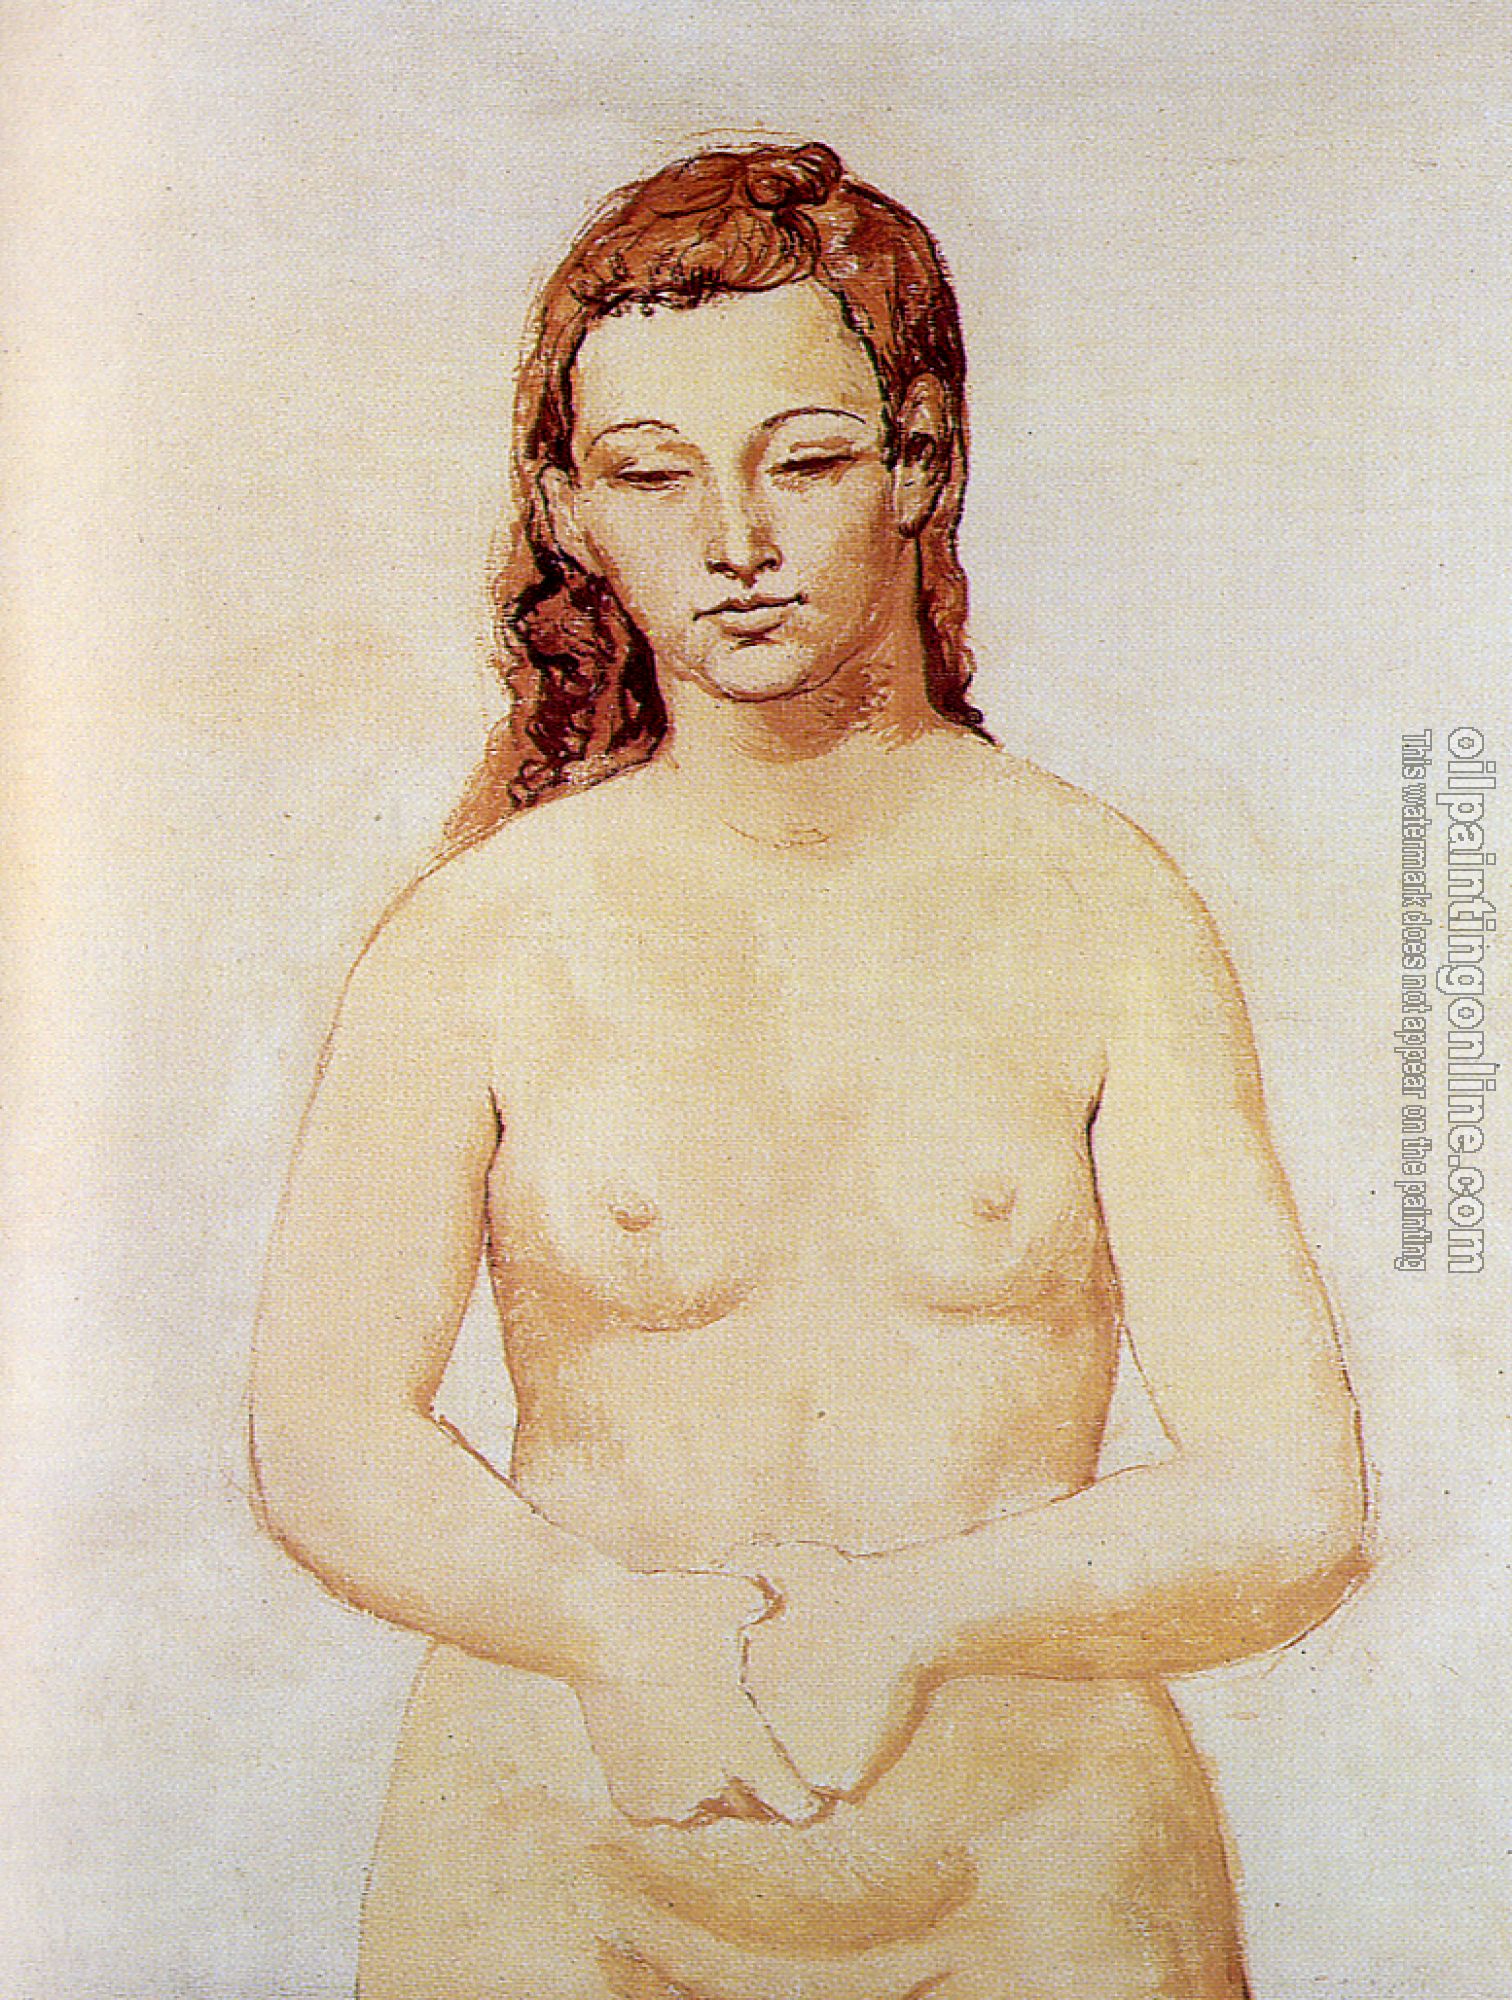 Picasso, Pablo - nude with crossed hands